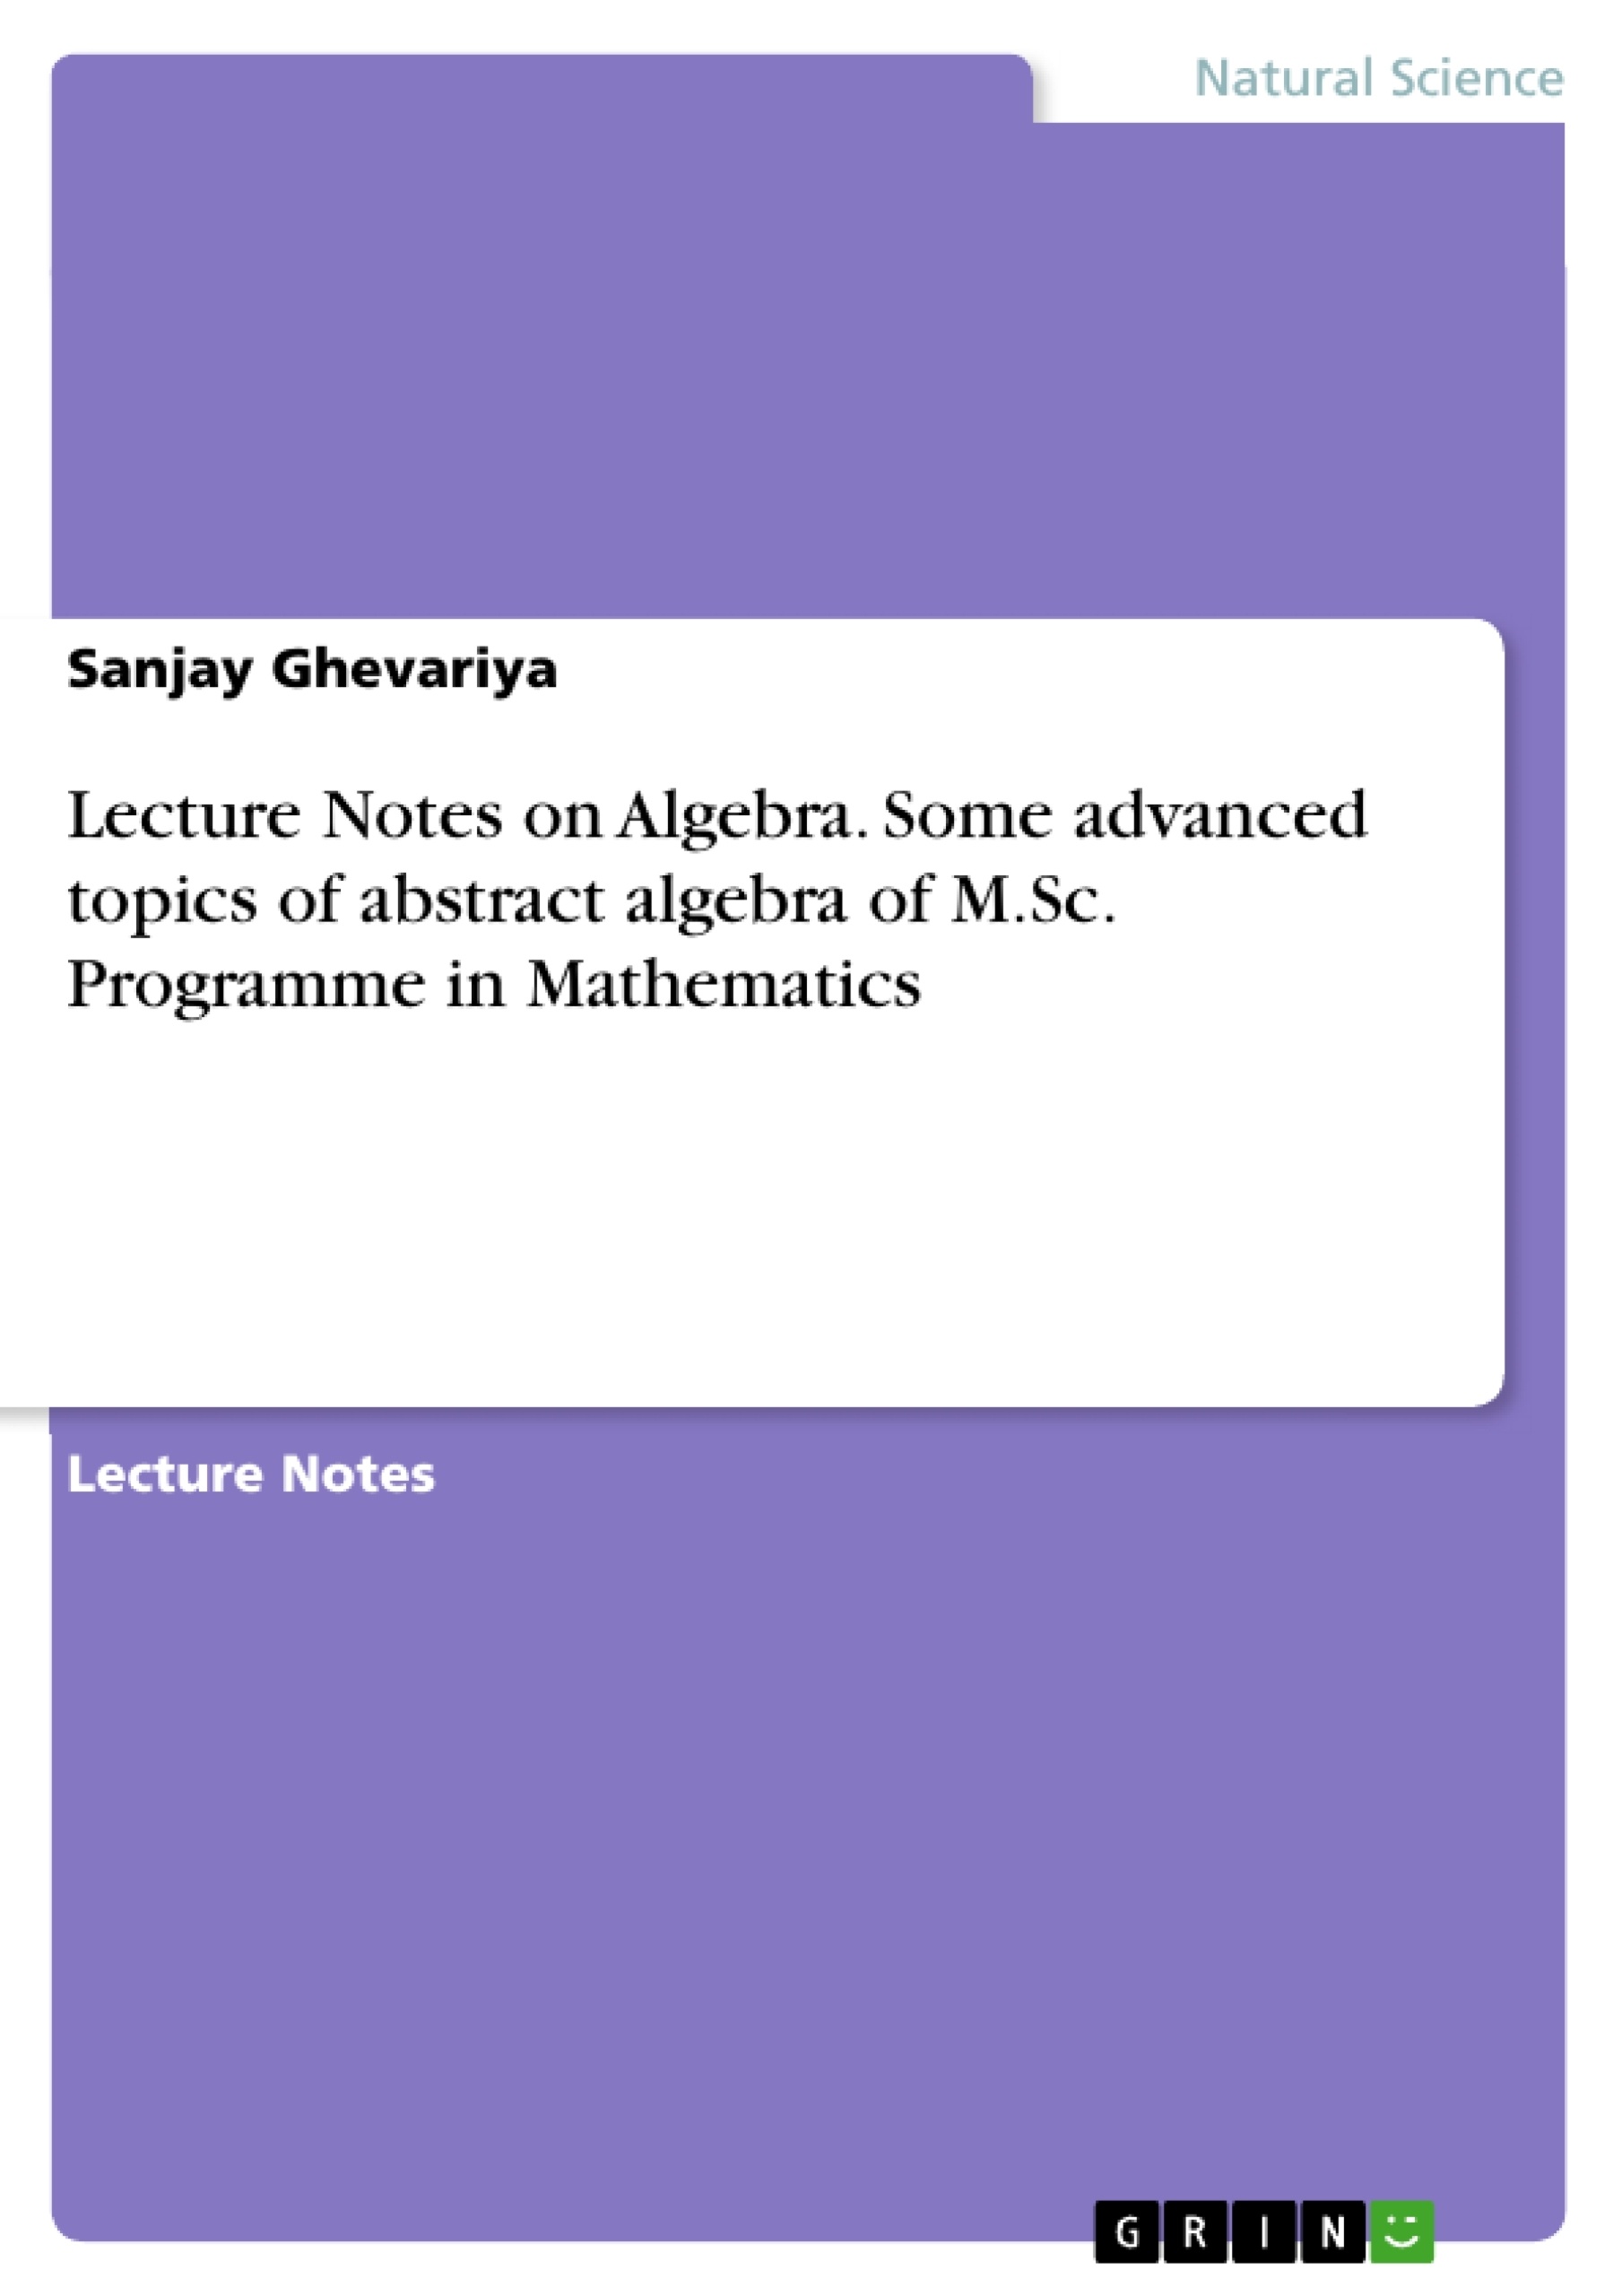 Título: Lecture Notes on Algebra. Some advanced topics of abstract algebra of M.Sc. Programme in Mathematics